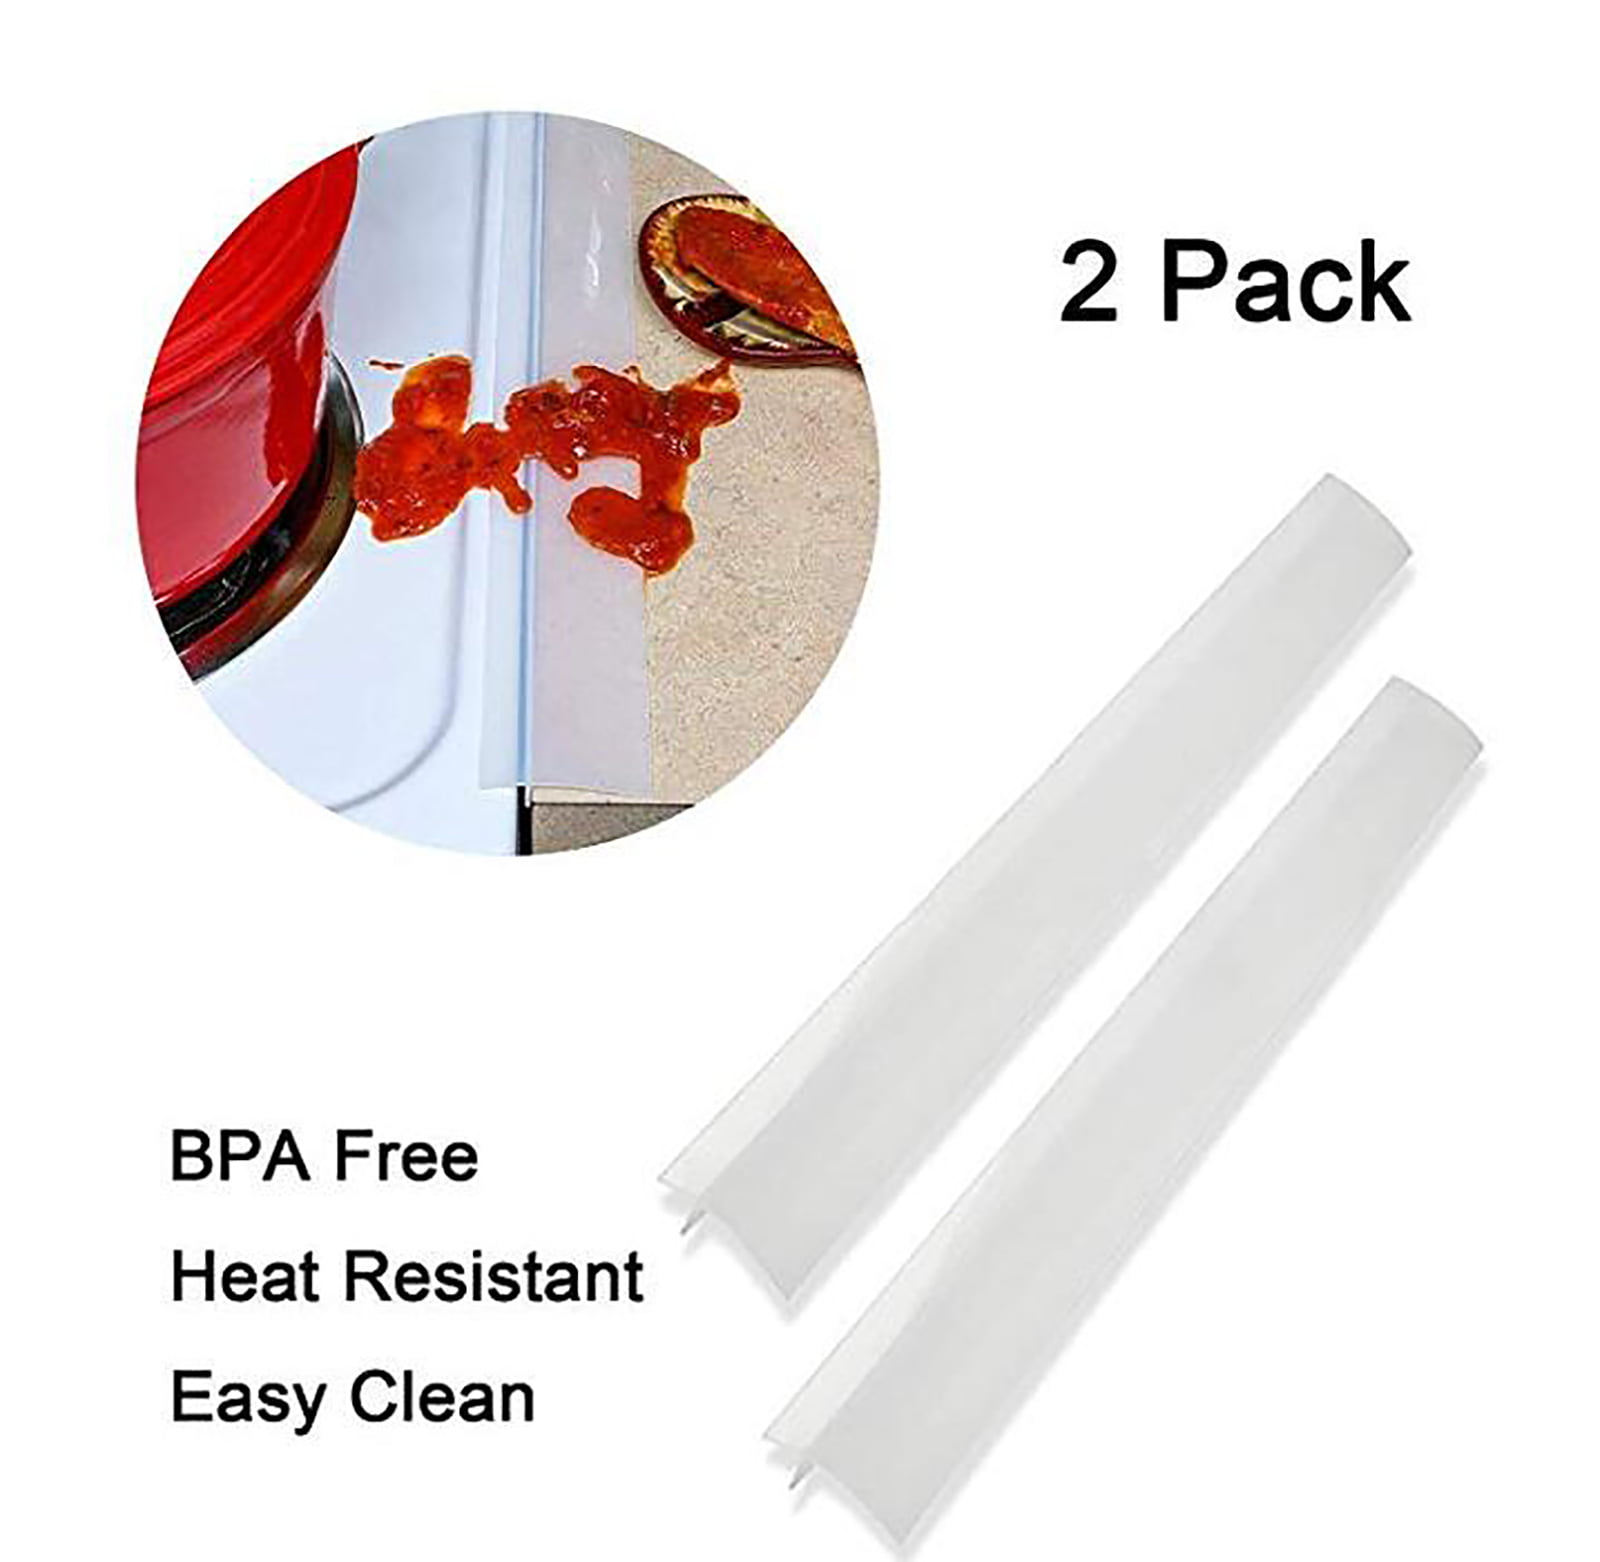 2pcs/set Kitchen Heat Resistant Silicone Stove Counter Gap Cover Seal Pad Filler 